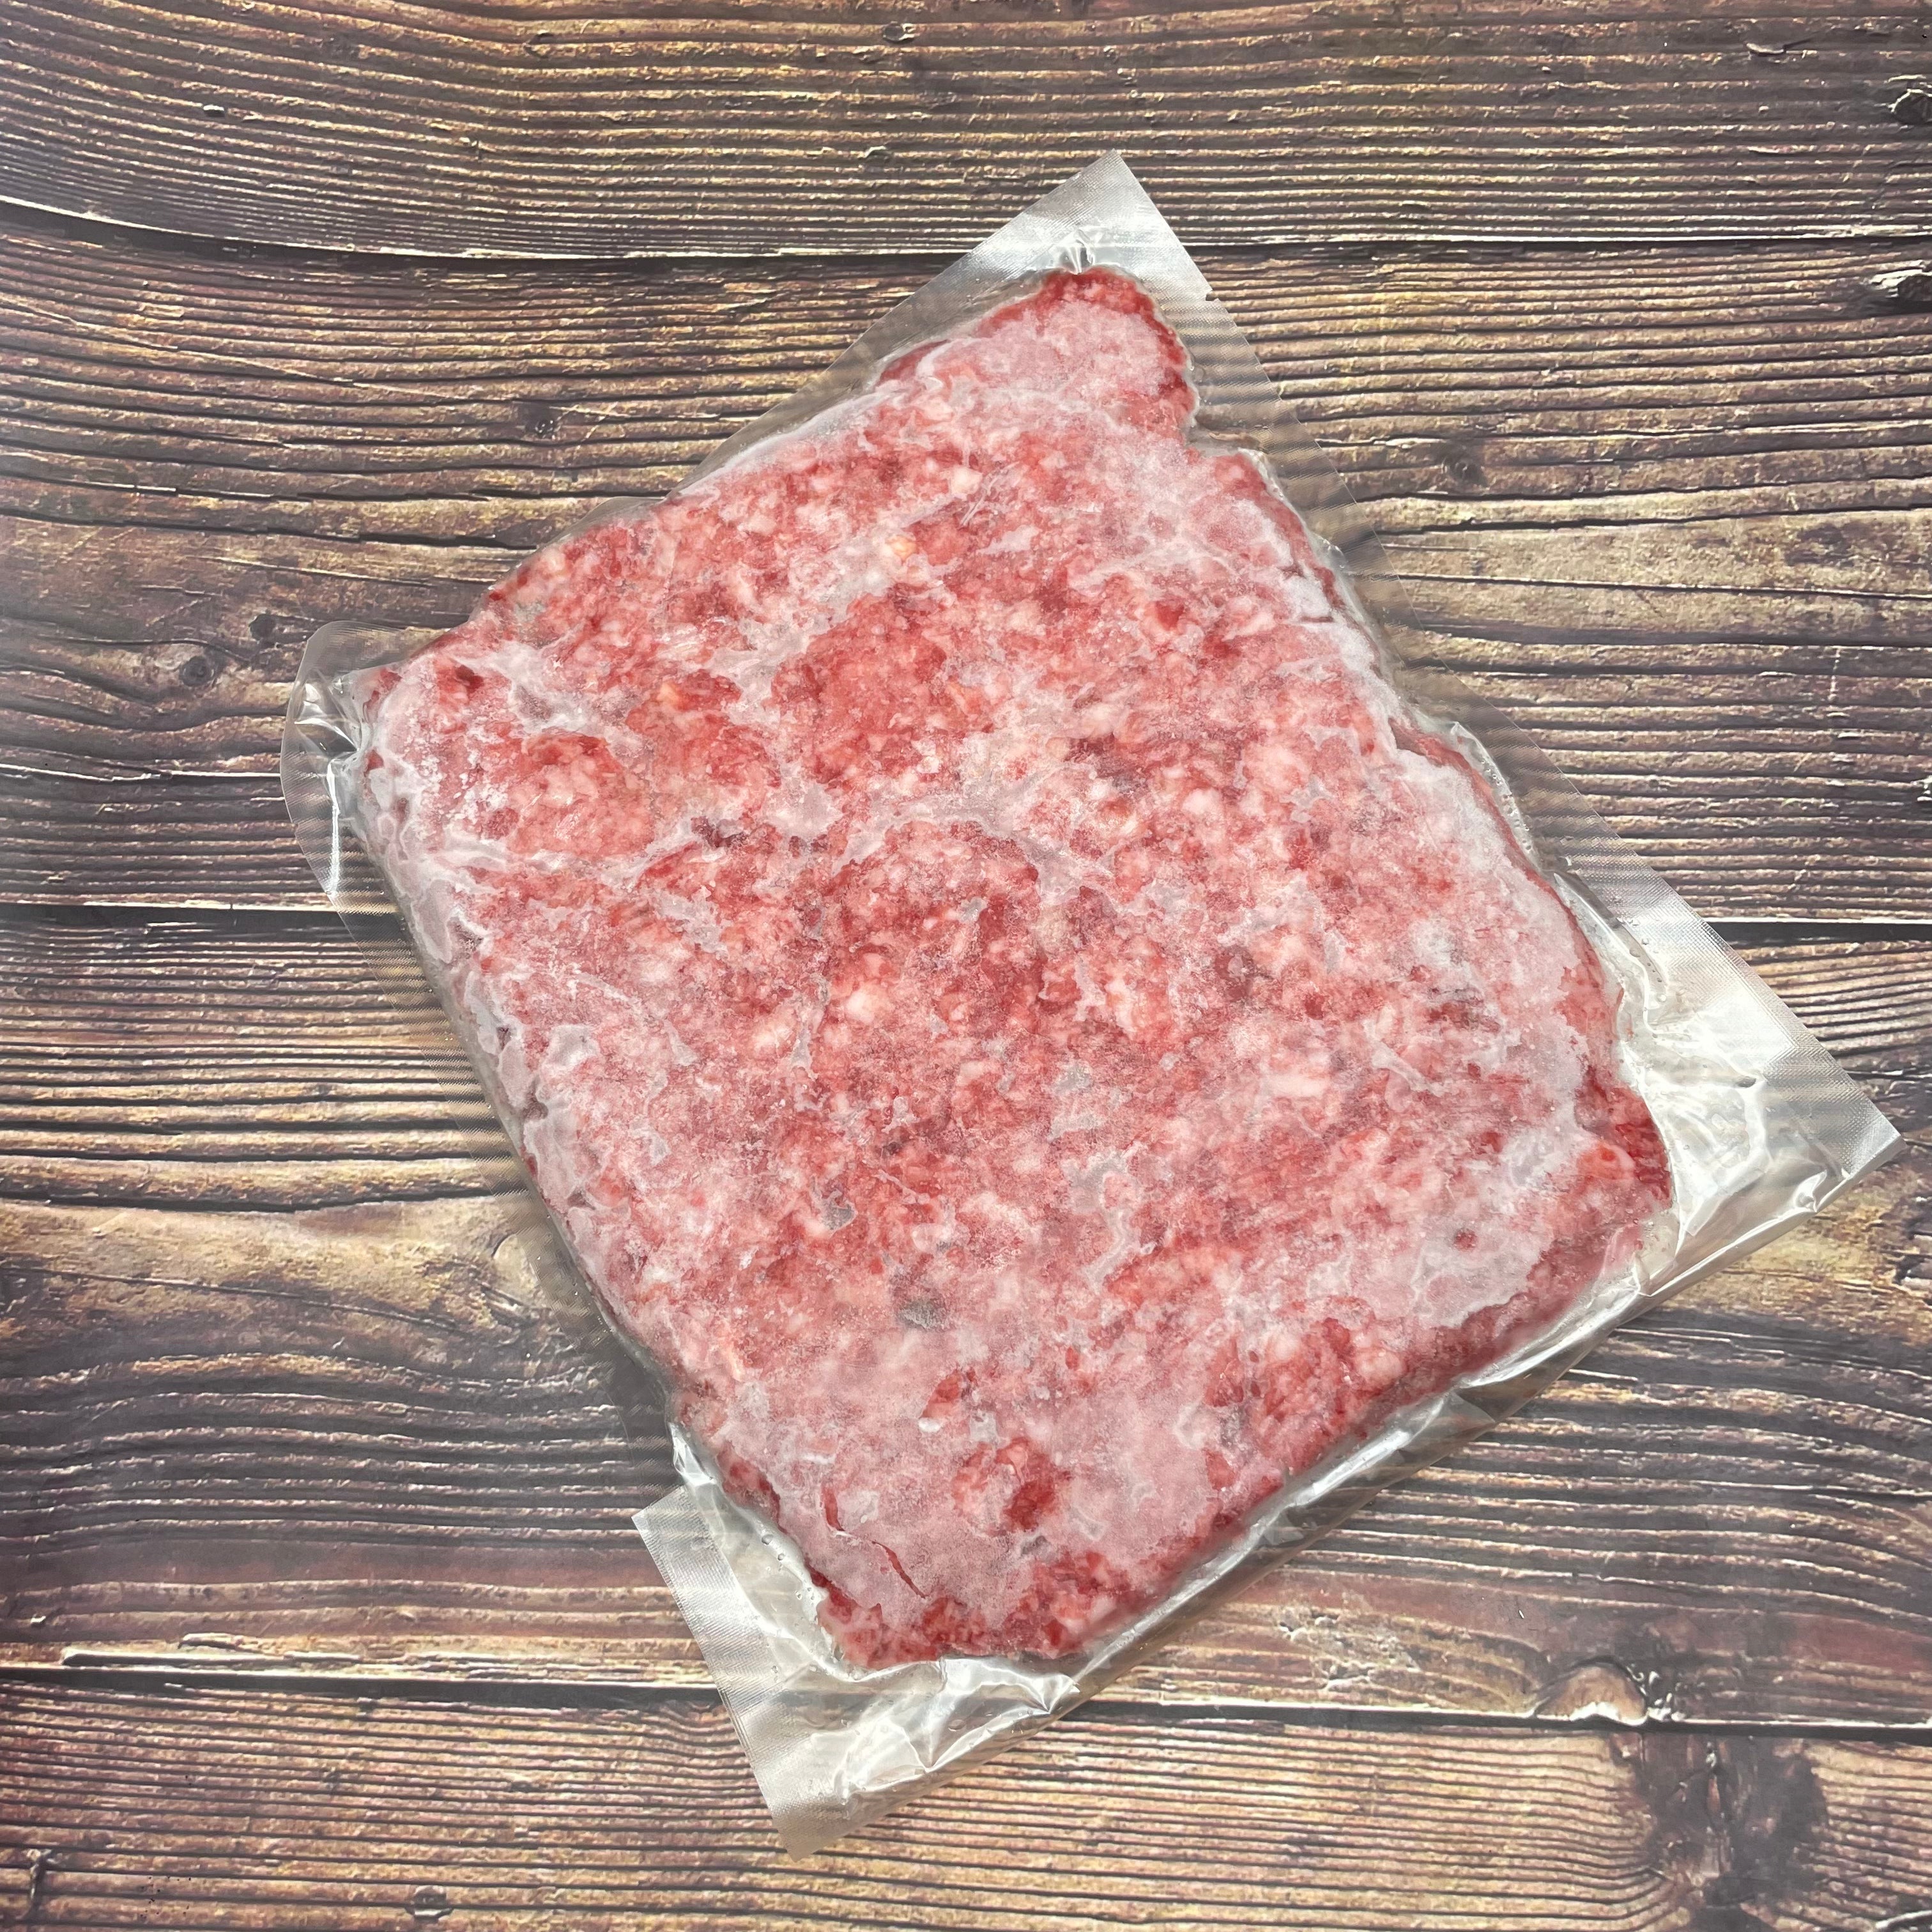 Wagyu Ground Beef เนื้อวากิวบด 500g/pack - The Foodworks